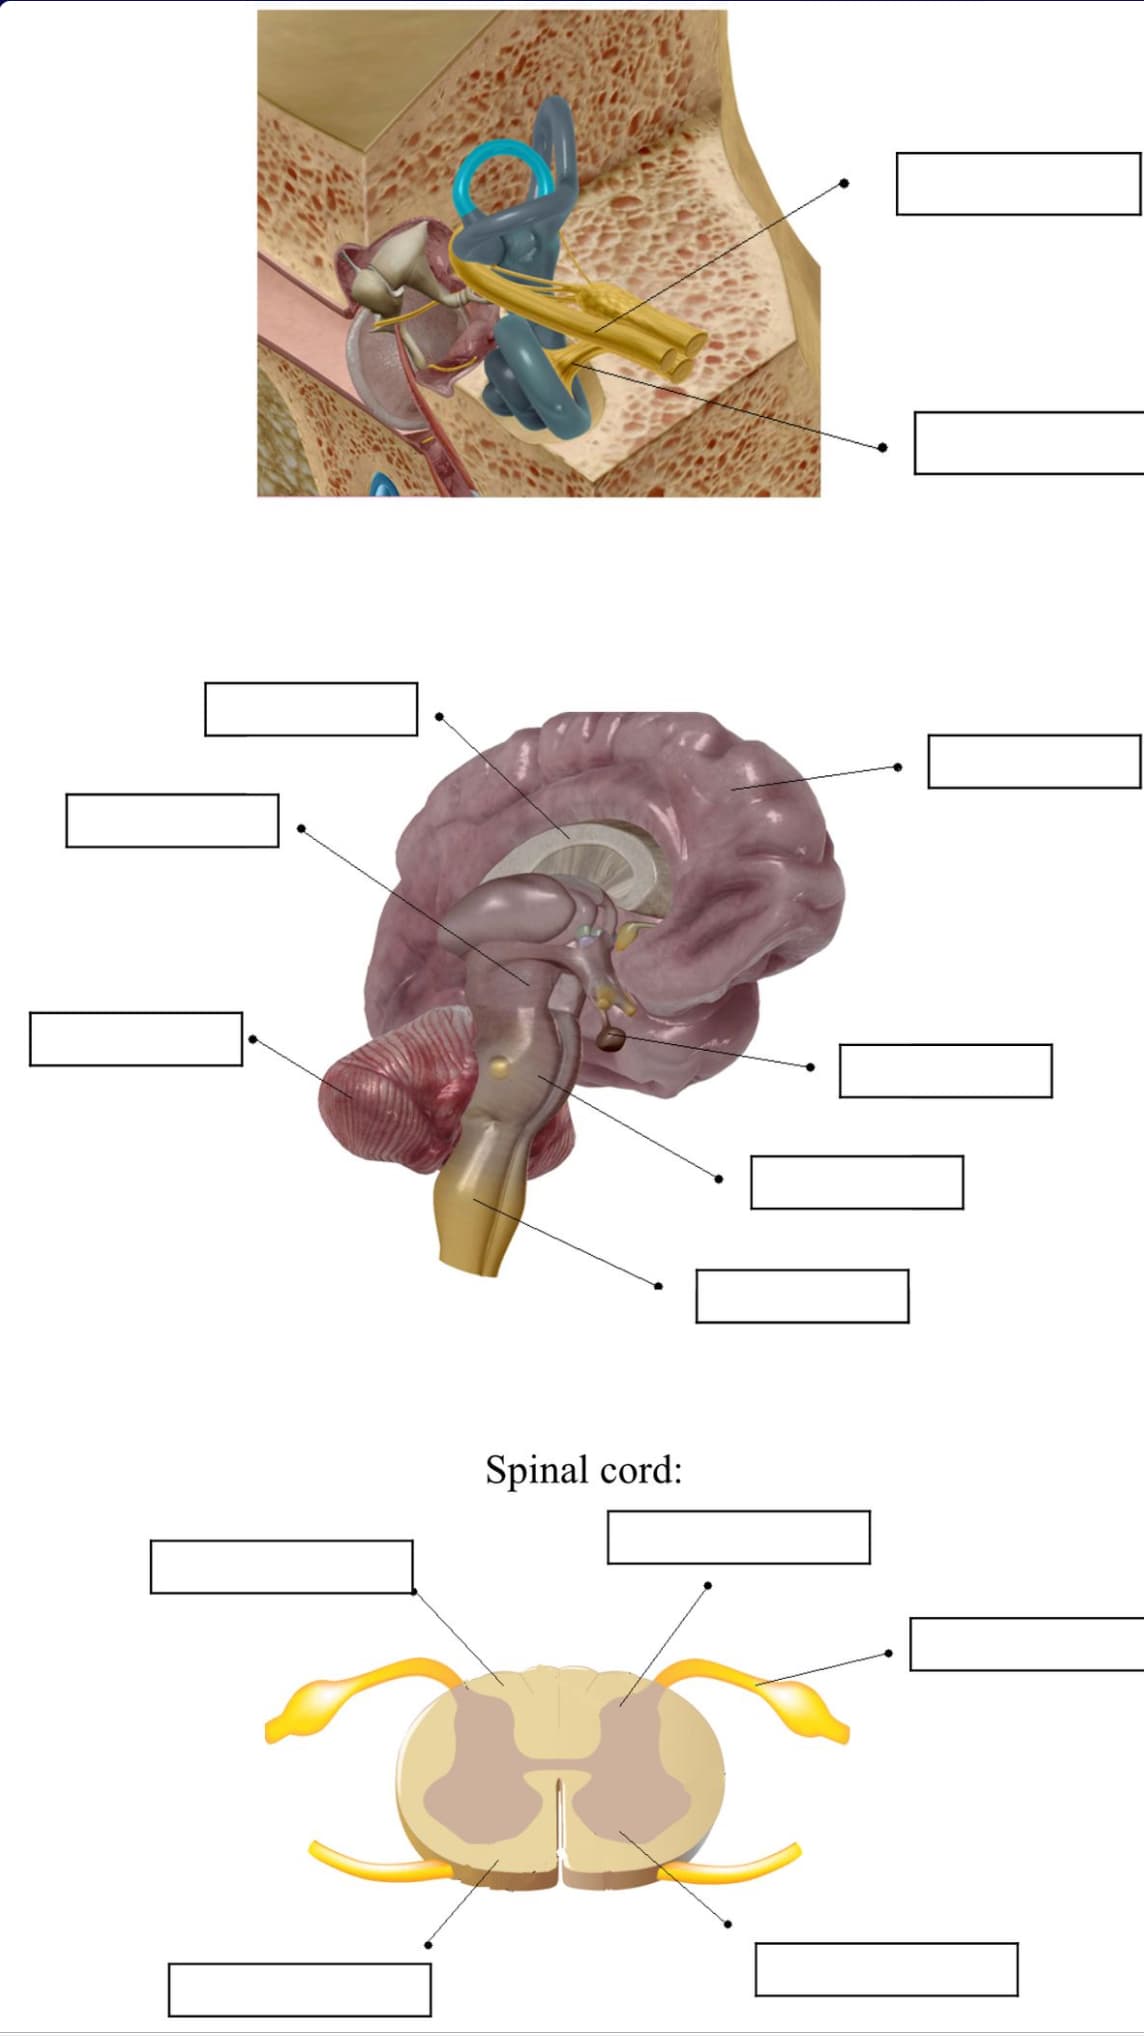 Spinal cord: